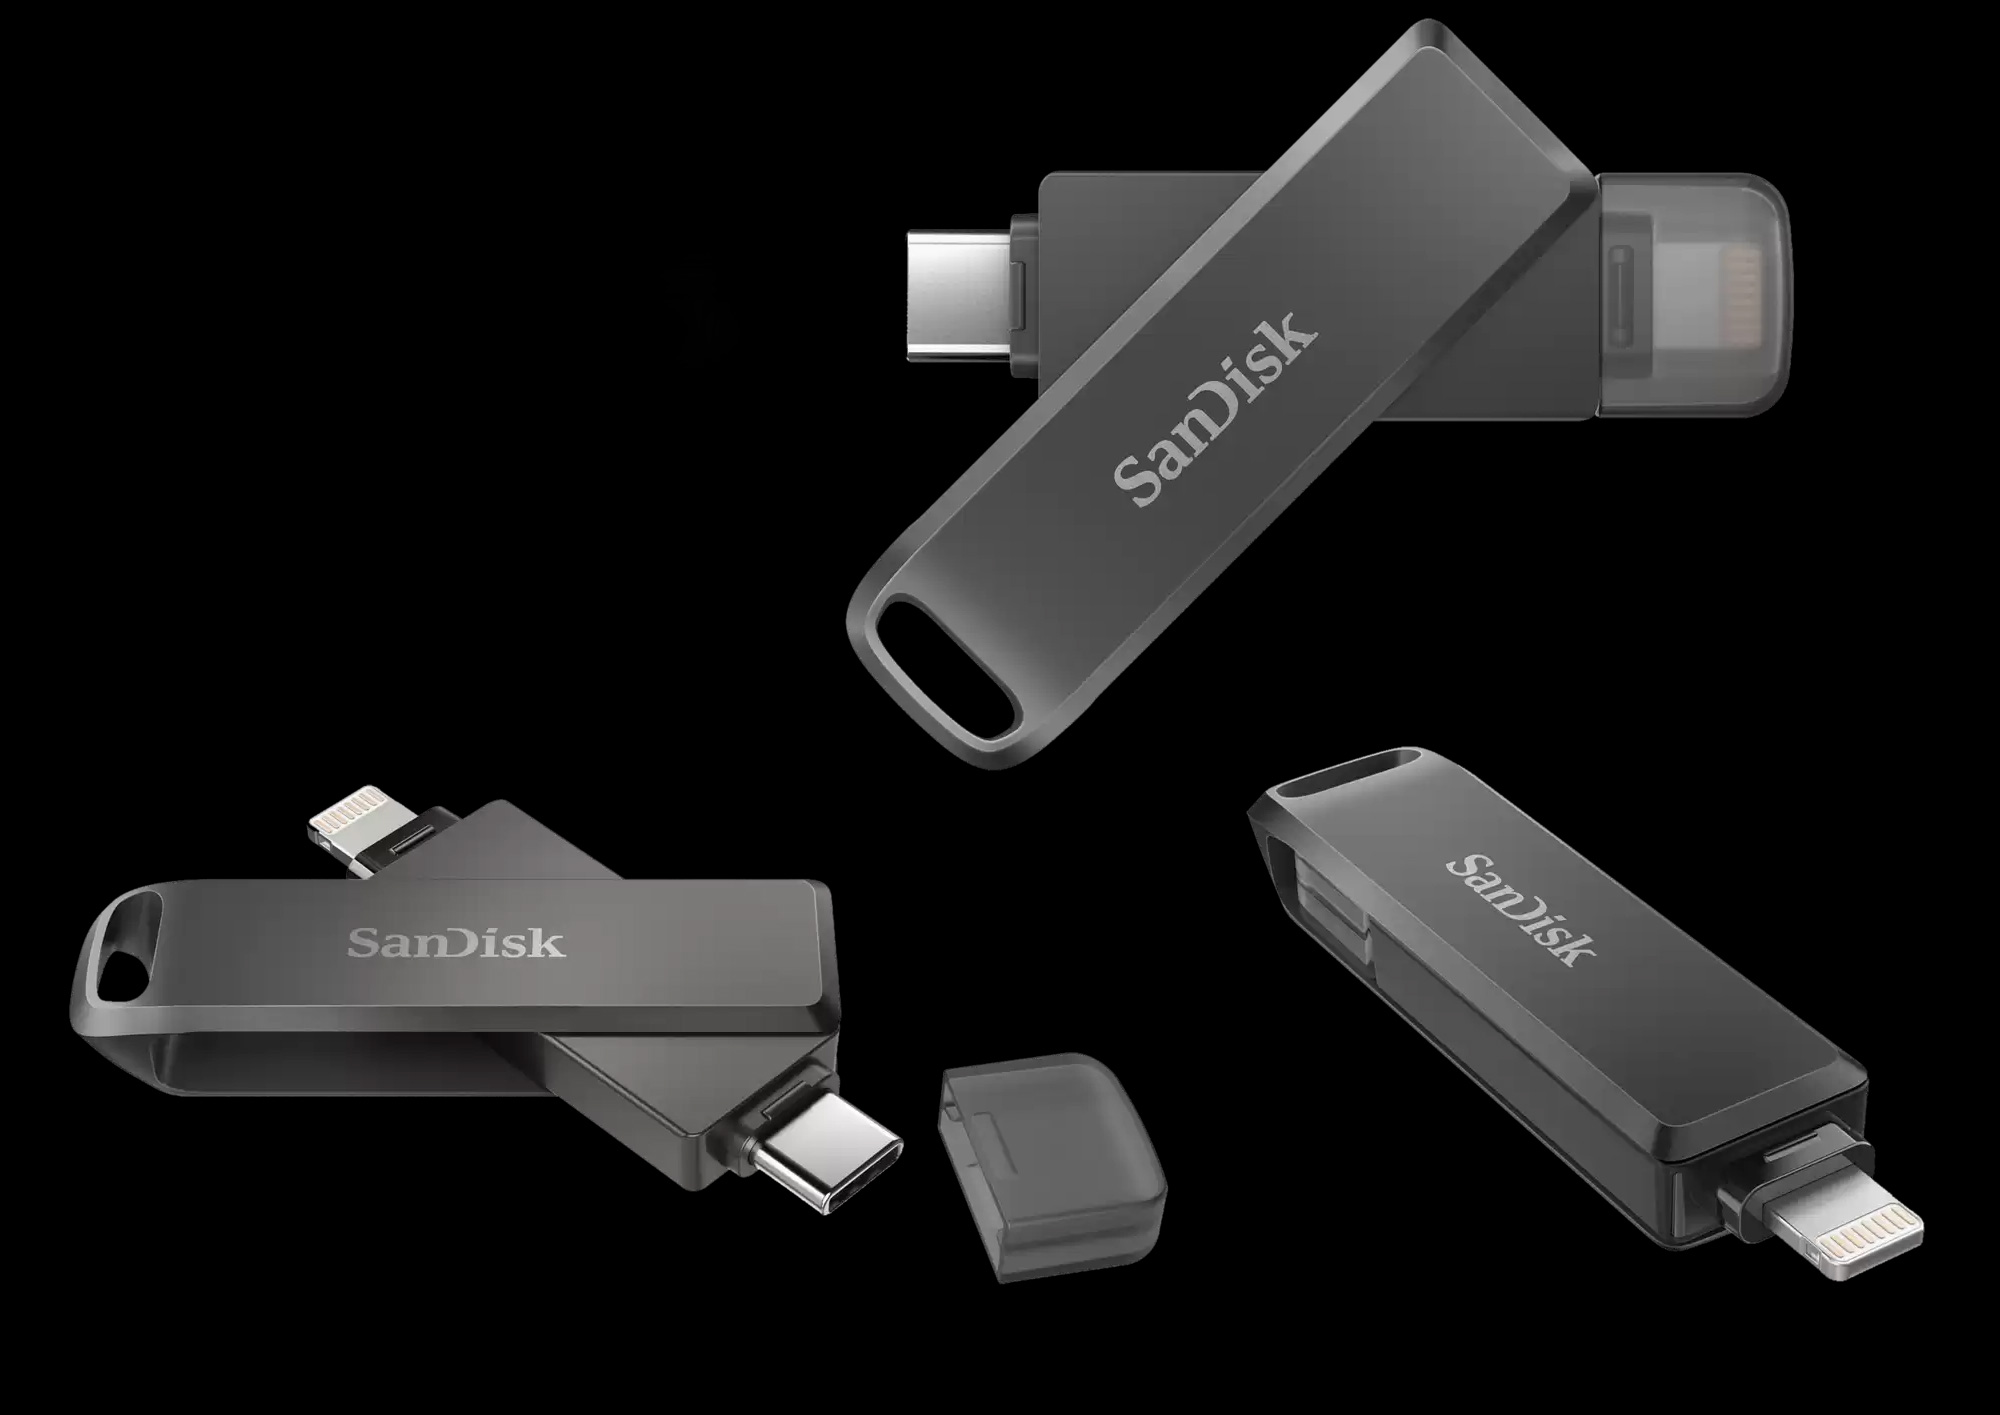 SanDisk's USB Type-C drive for iPhone and Android by Jose Antunes -  ProVideo Coalition